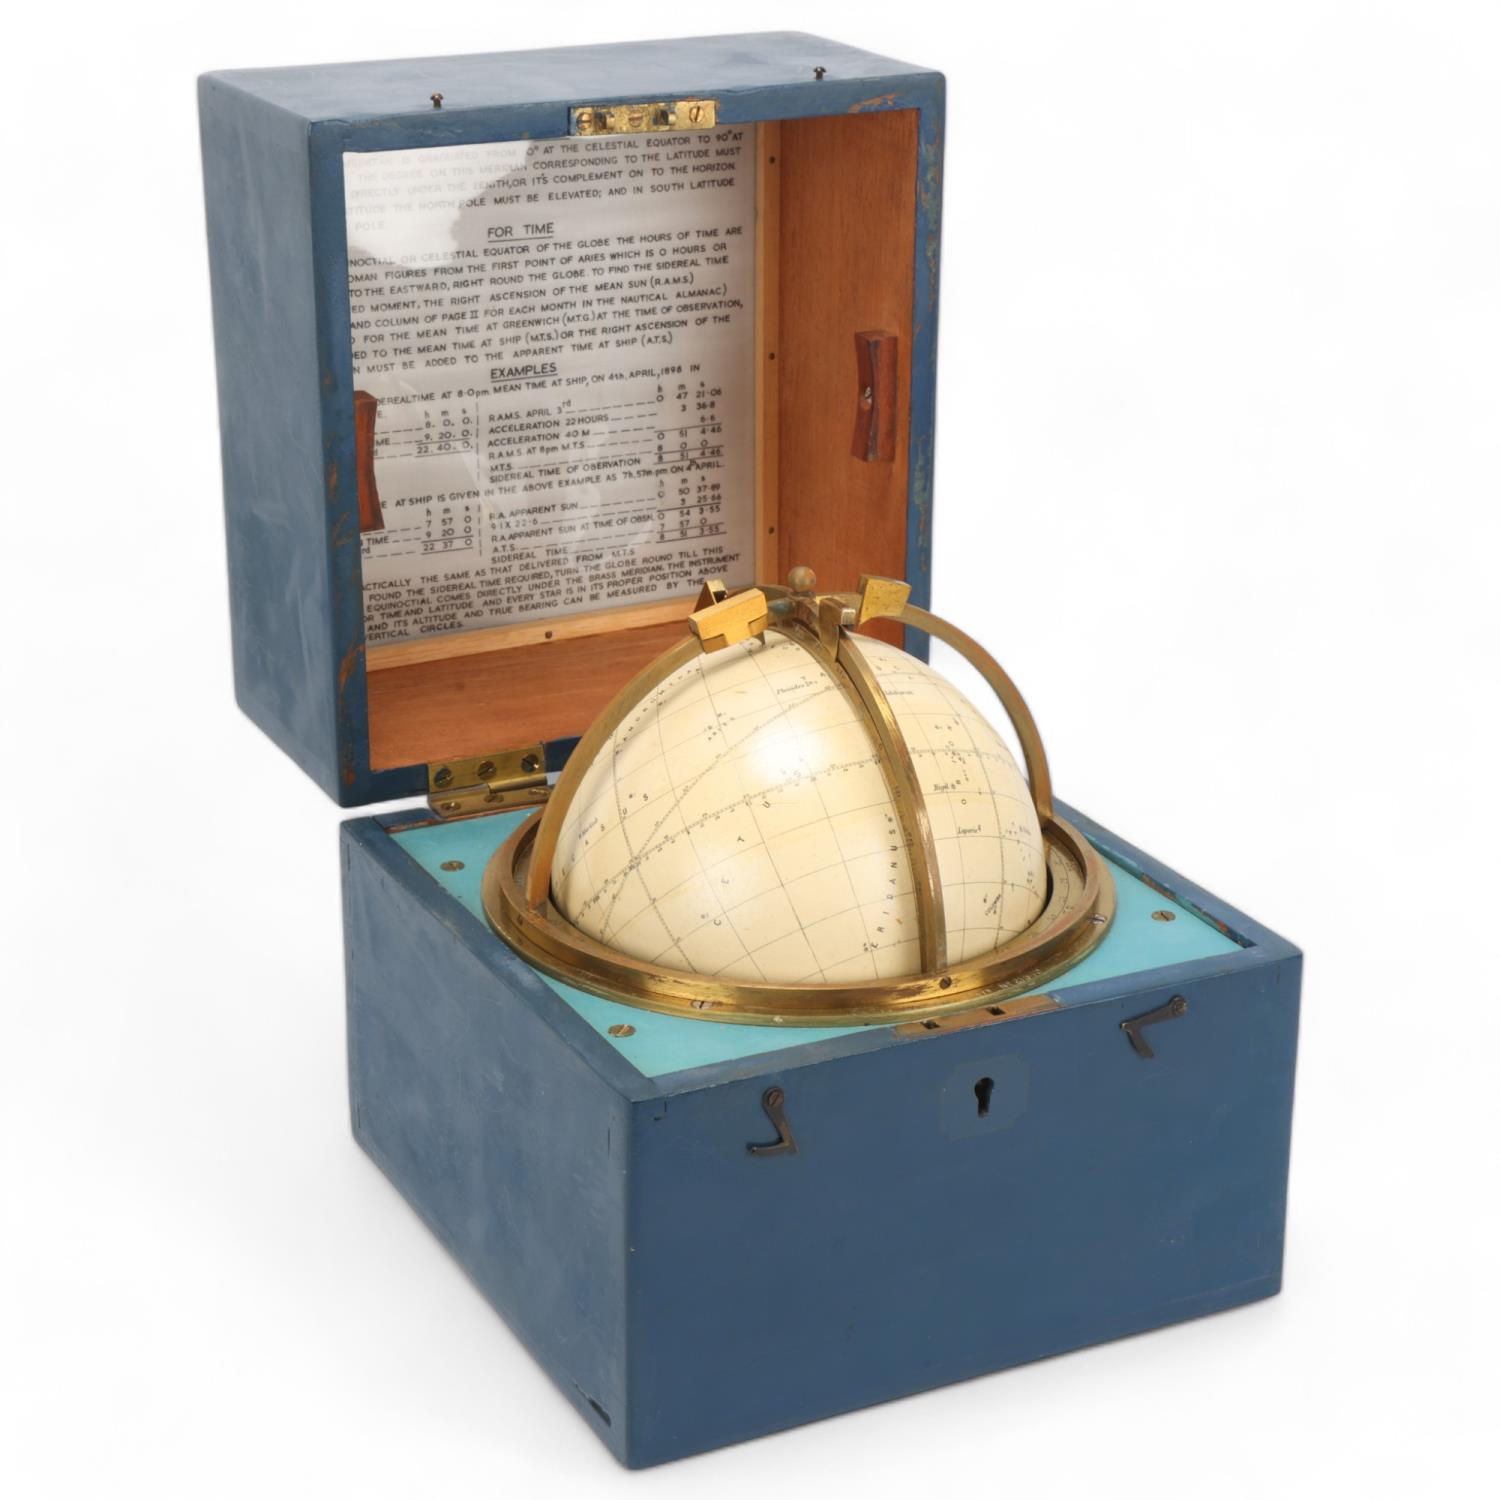 A starglobe, by Cary of London, brass-mounted and in original painted wooden case, patent no. 21540,